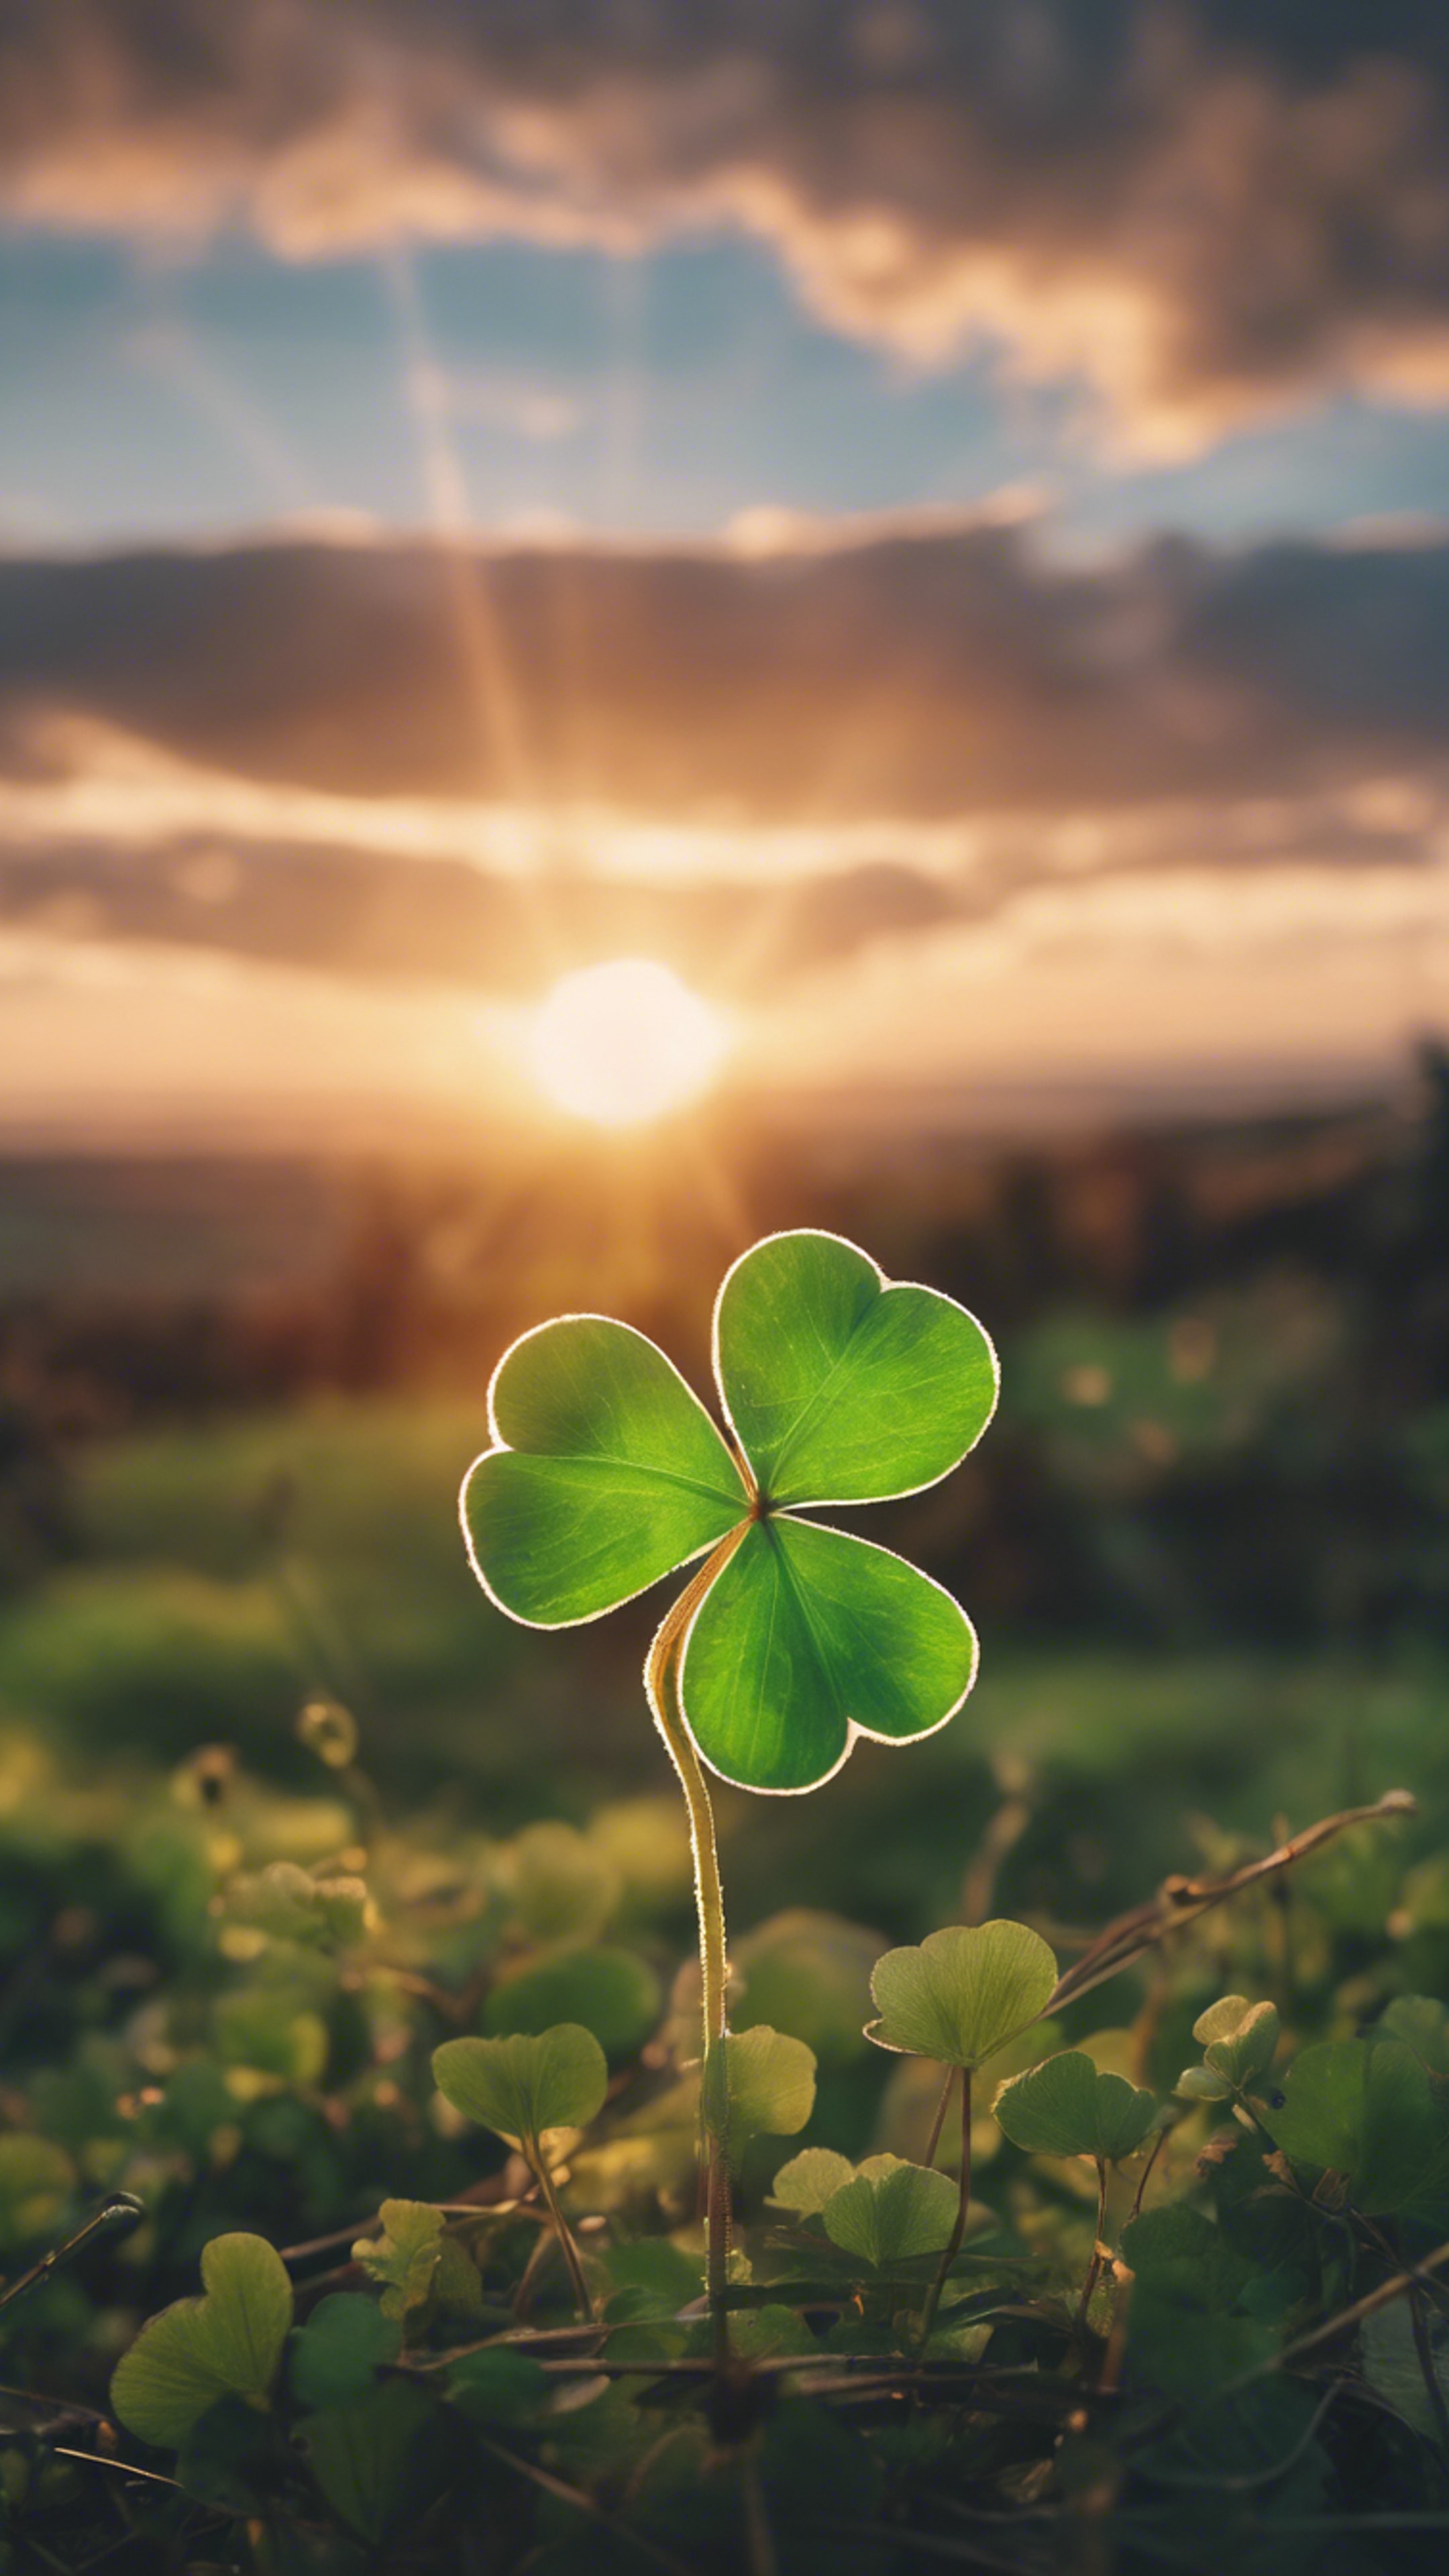 An enchanting sunset over the Irish countryside with a four-leaf clover in the foreground on St. Patrick's Day. Tapeta[4ad1db603cc8494da5b1]